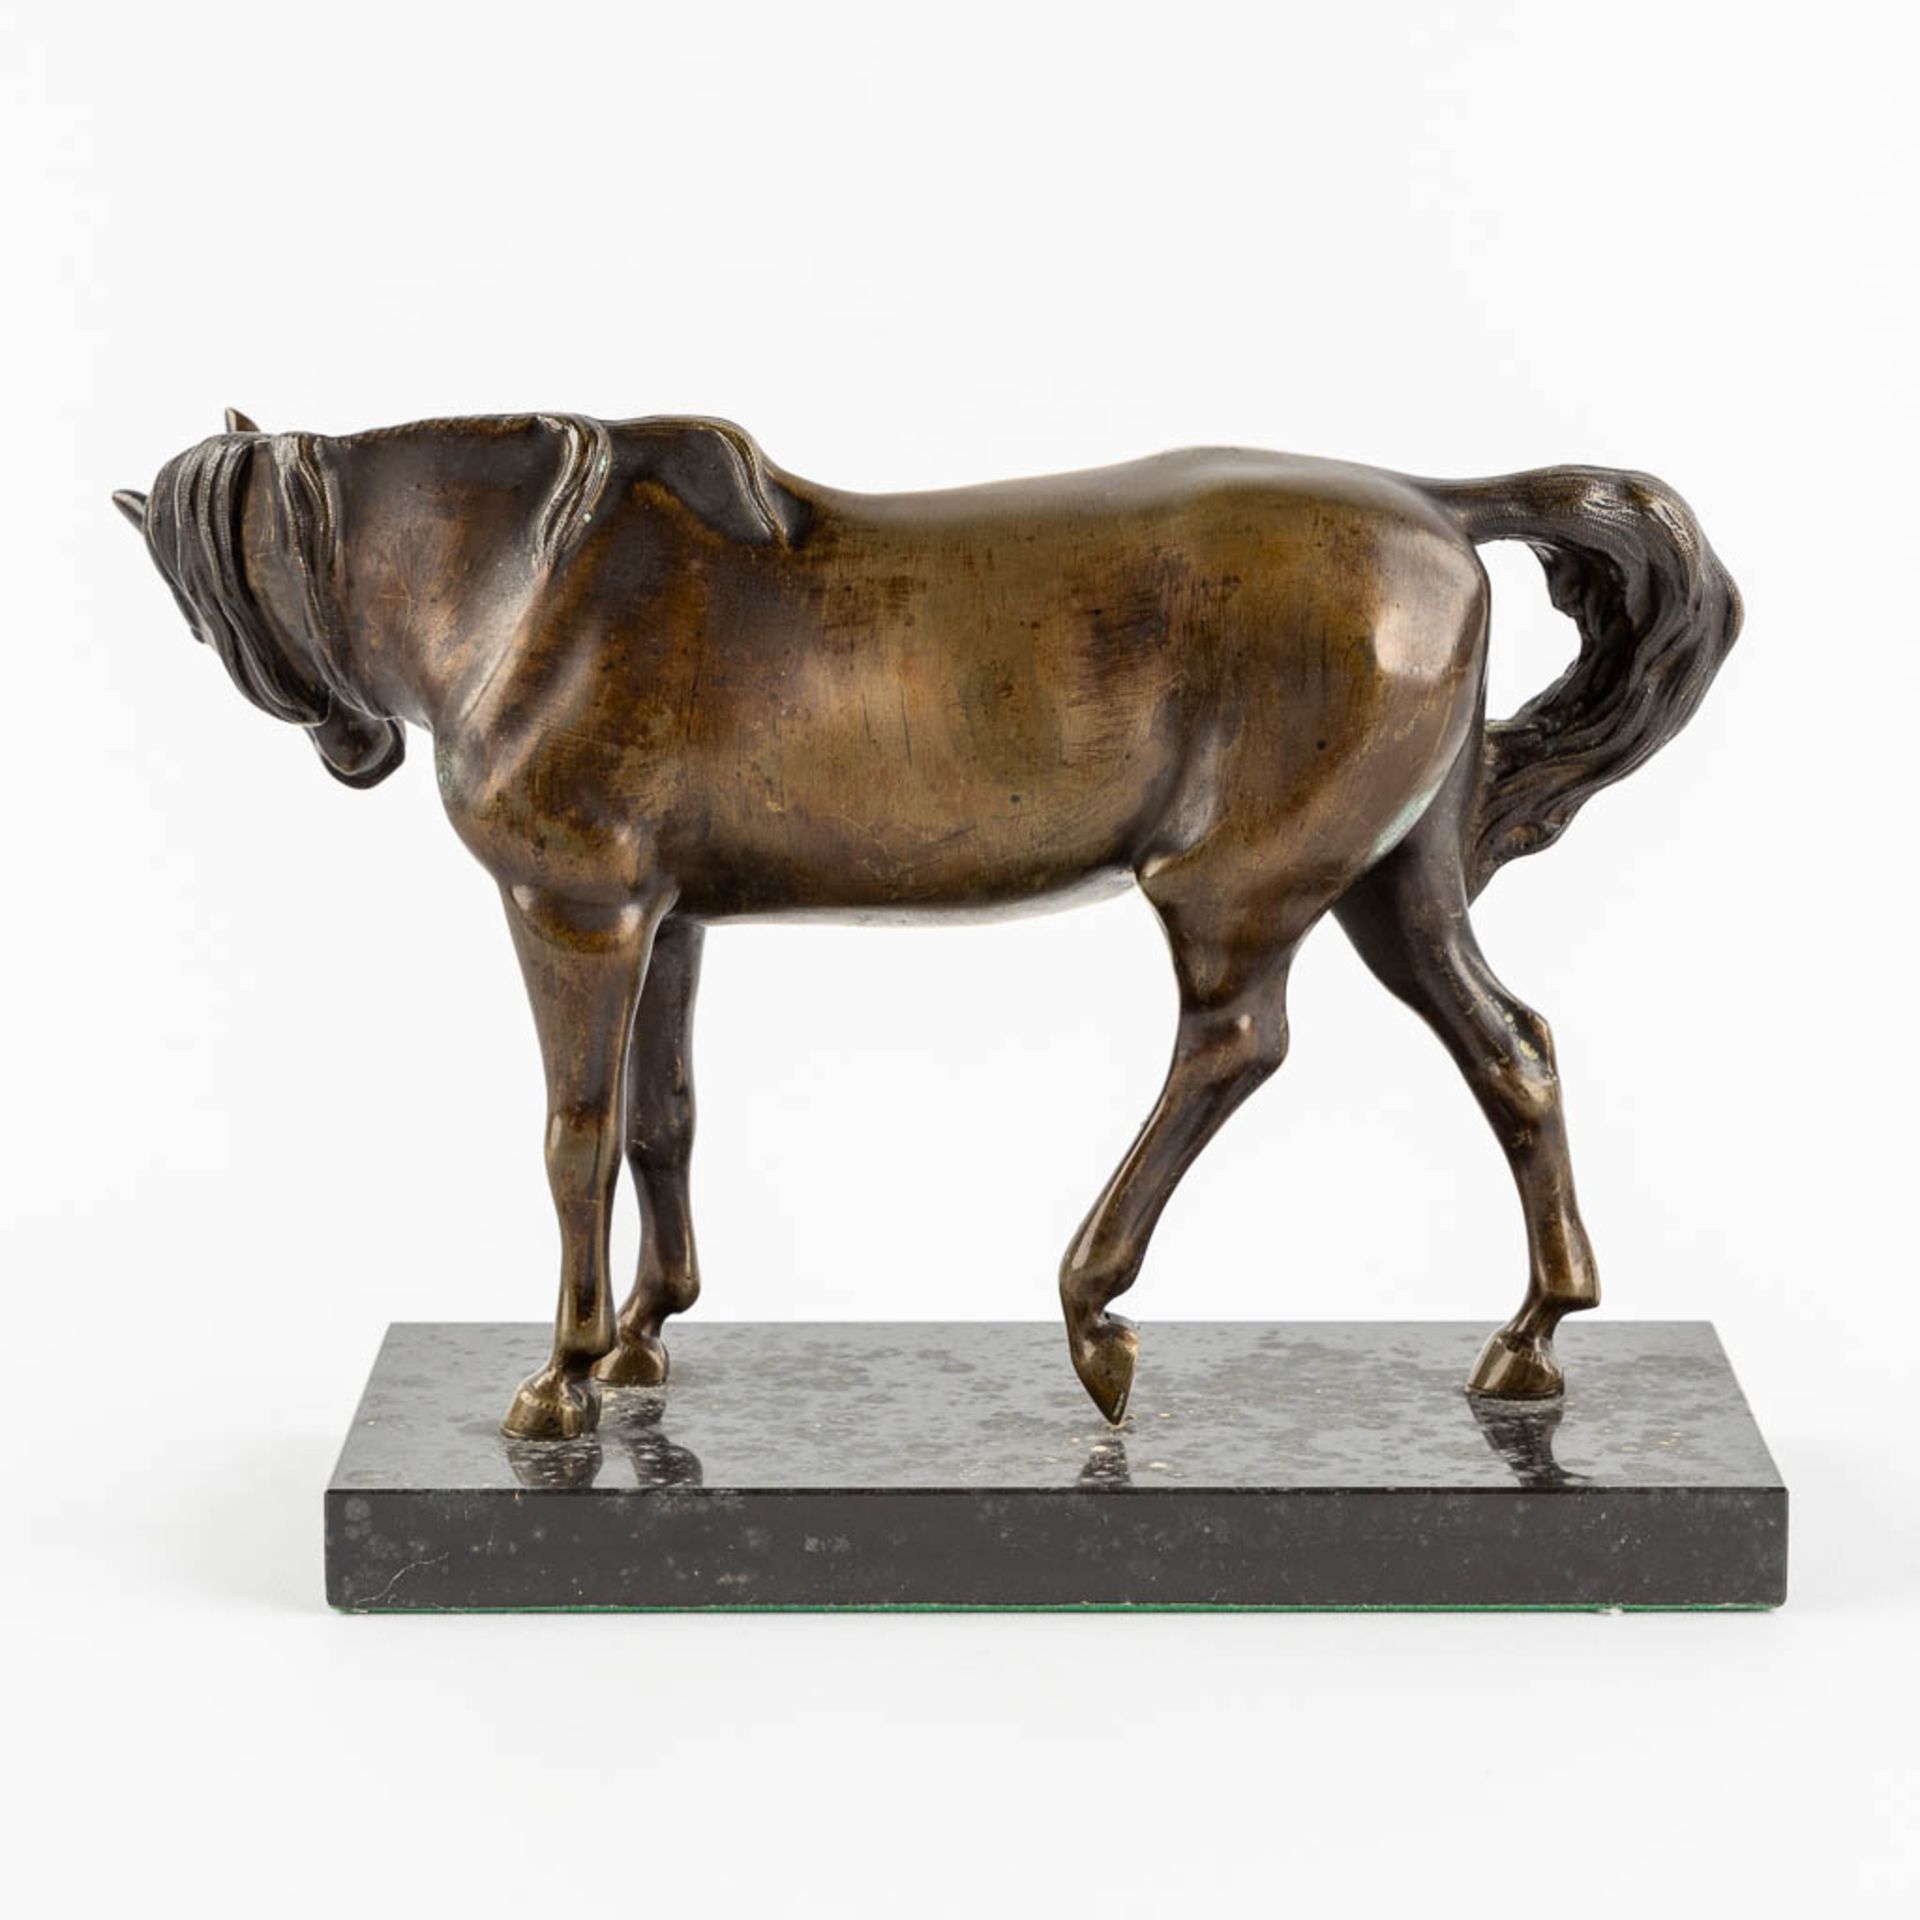 A patinated bronze figurine of a horse, black marble. (L:11 x W:27 x H:18 cm) - Image 5 of 9